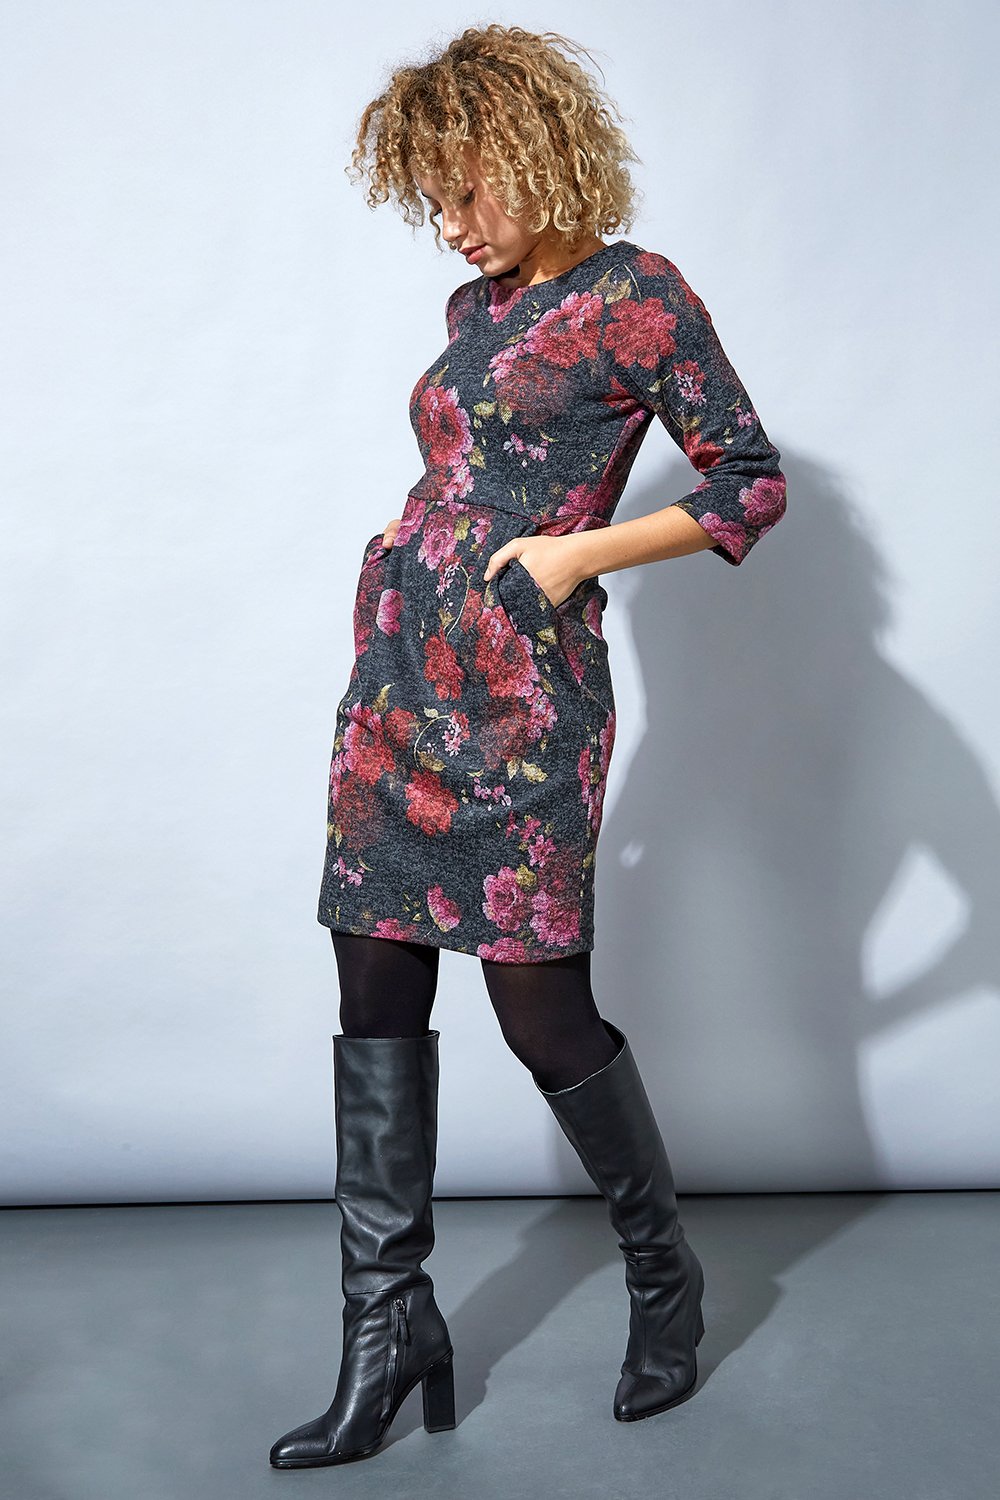 MAGENTA Wooly Touch Floral Print Shift Dress, Image 2 of 5